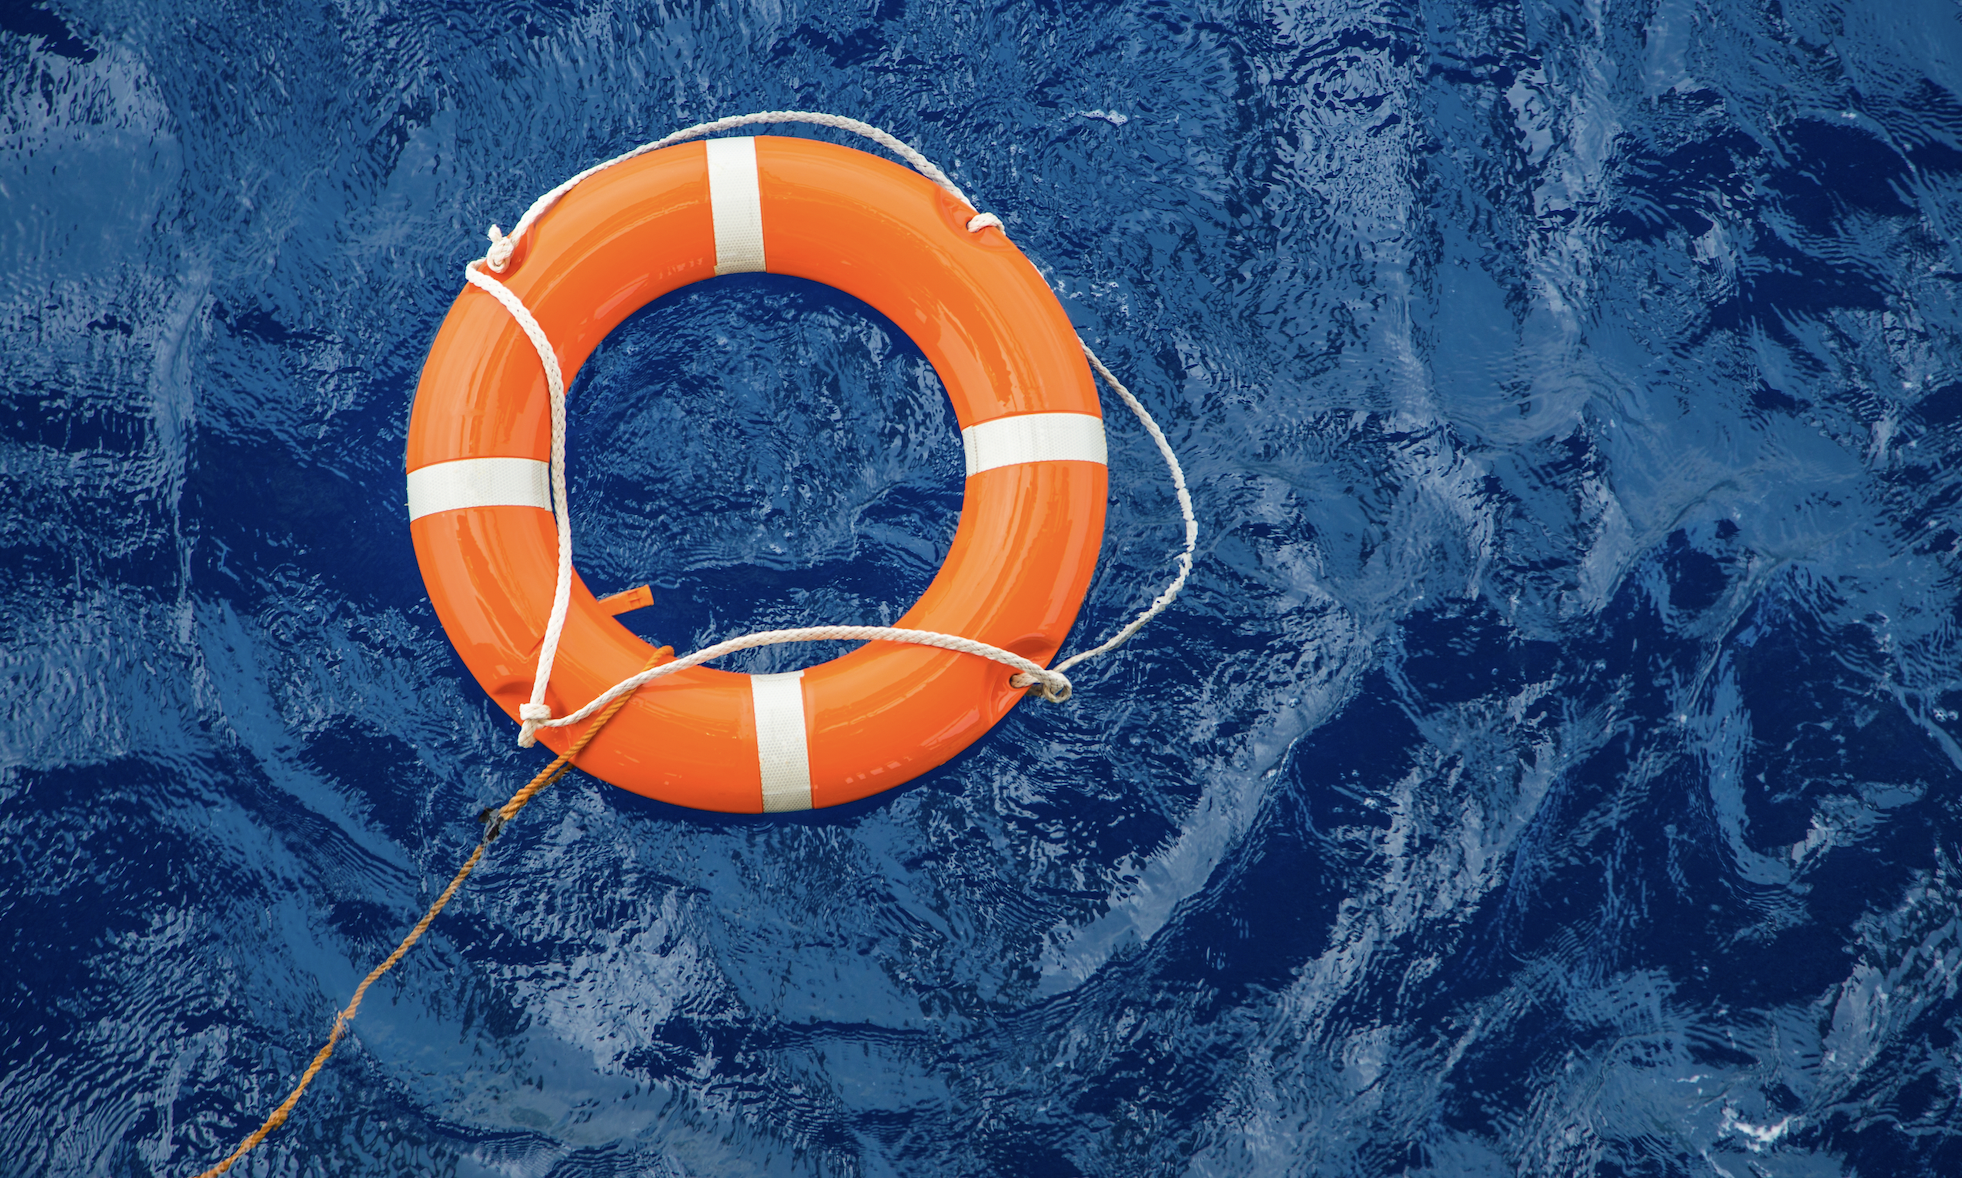 Image of a life buoy in water